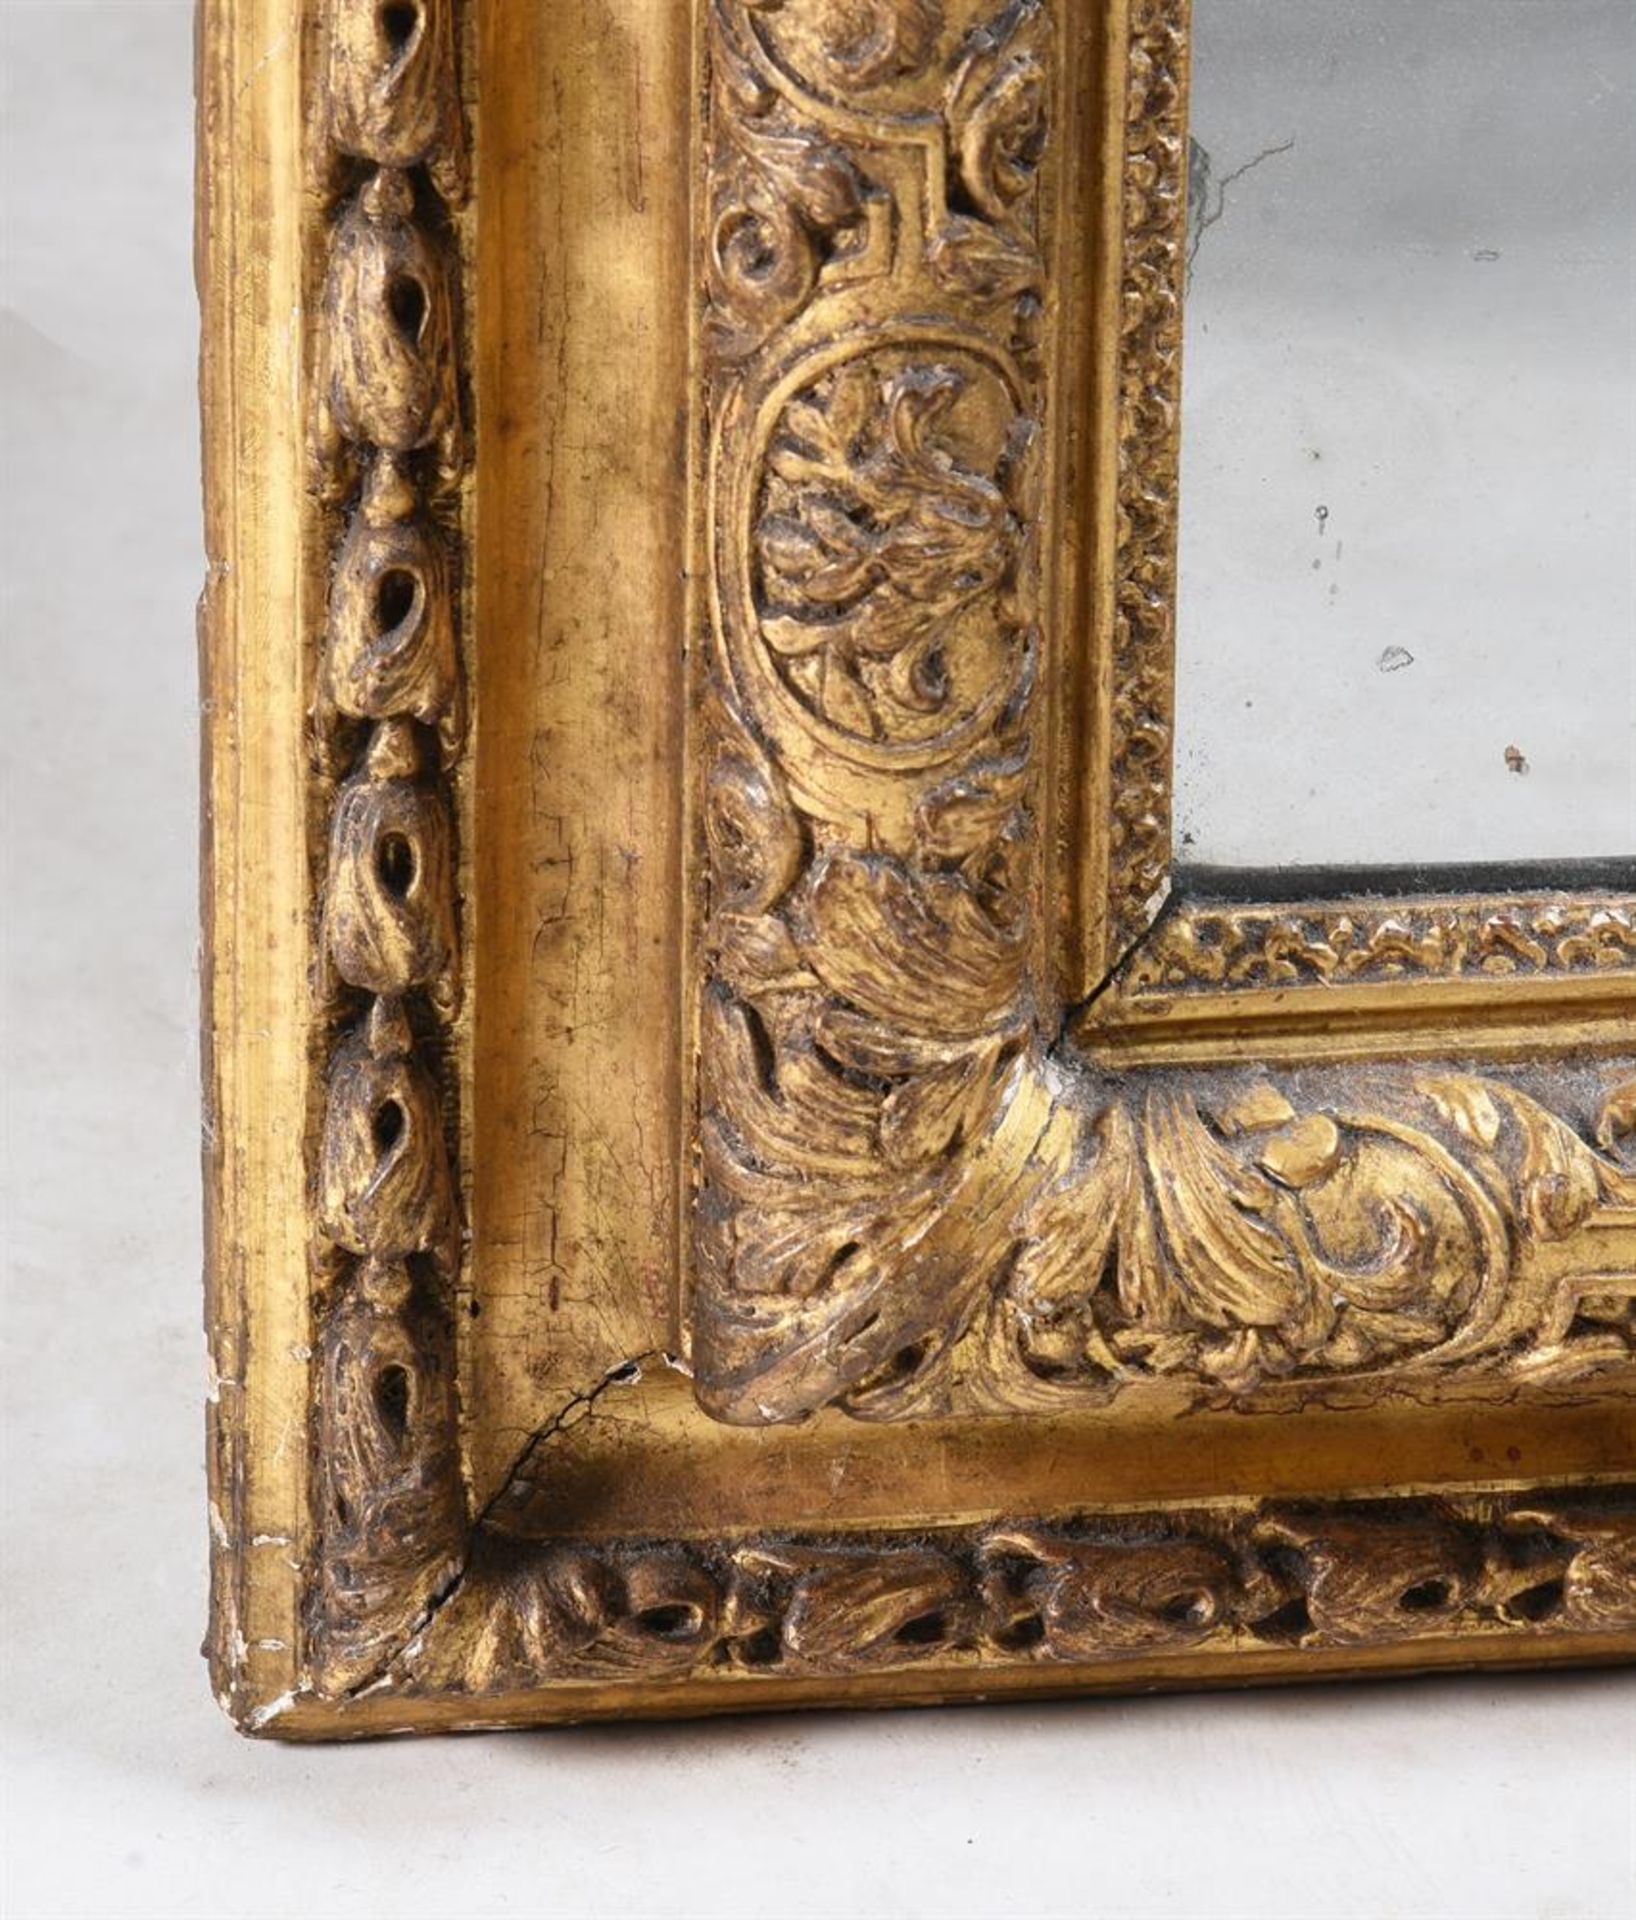 A WILLIAM & MARY CARVED GILTWOOD MIRROR, LATE 17TH CENTURY - Image 3 of 4